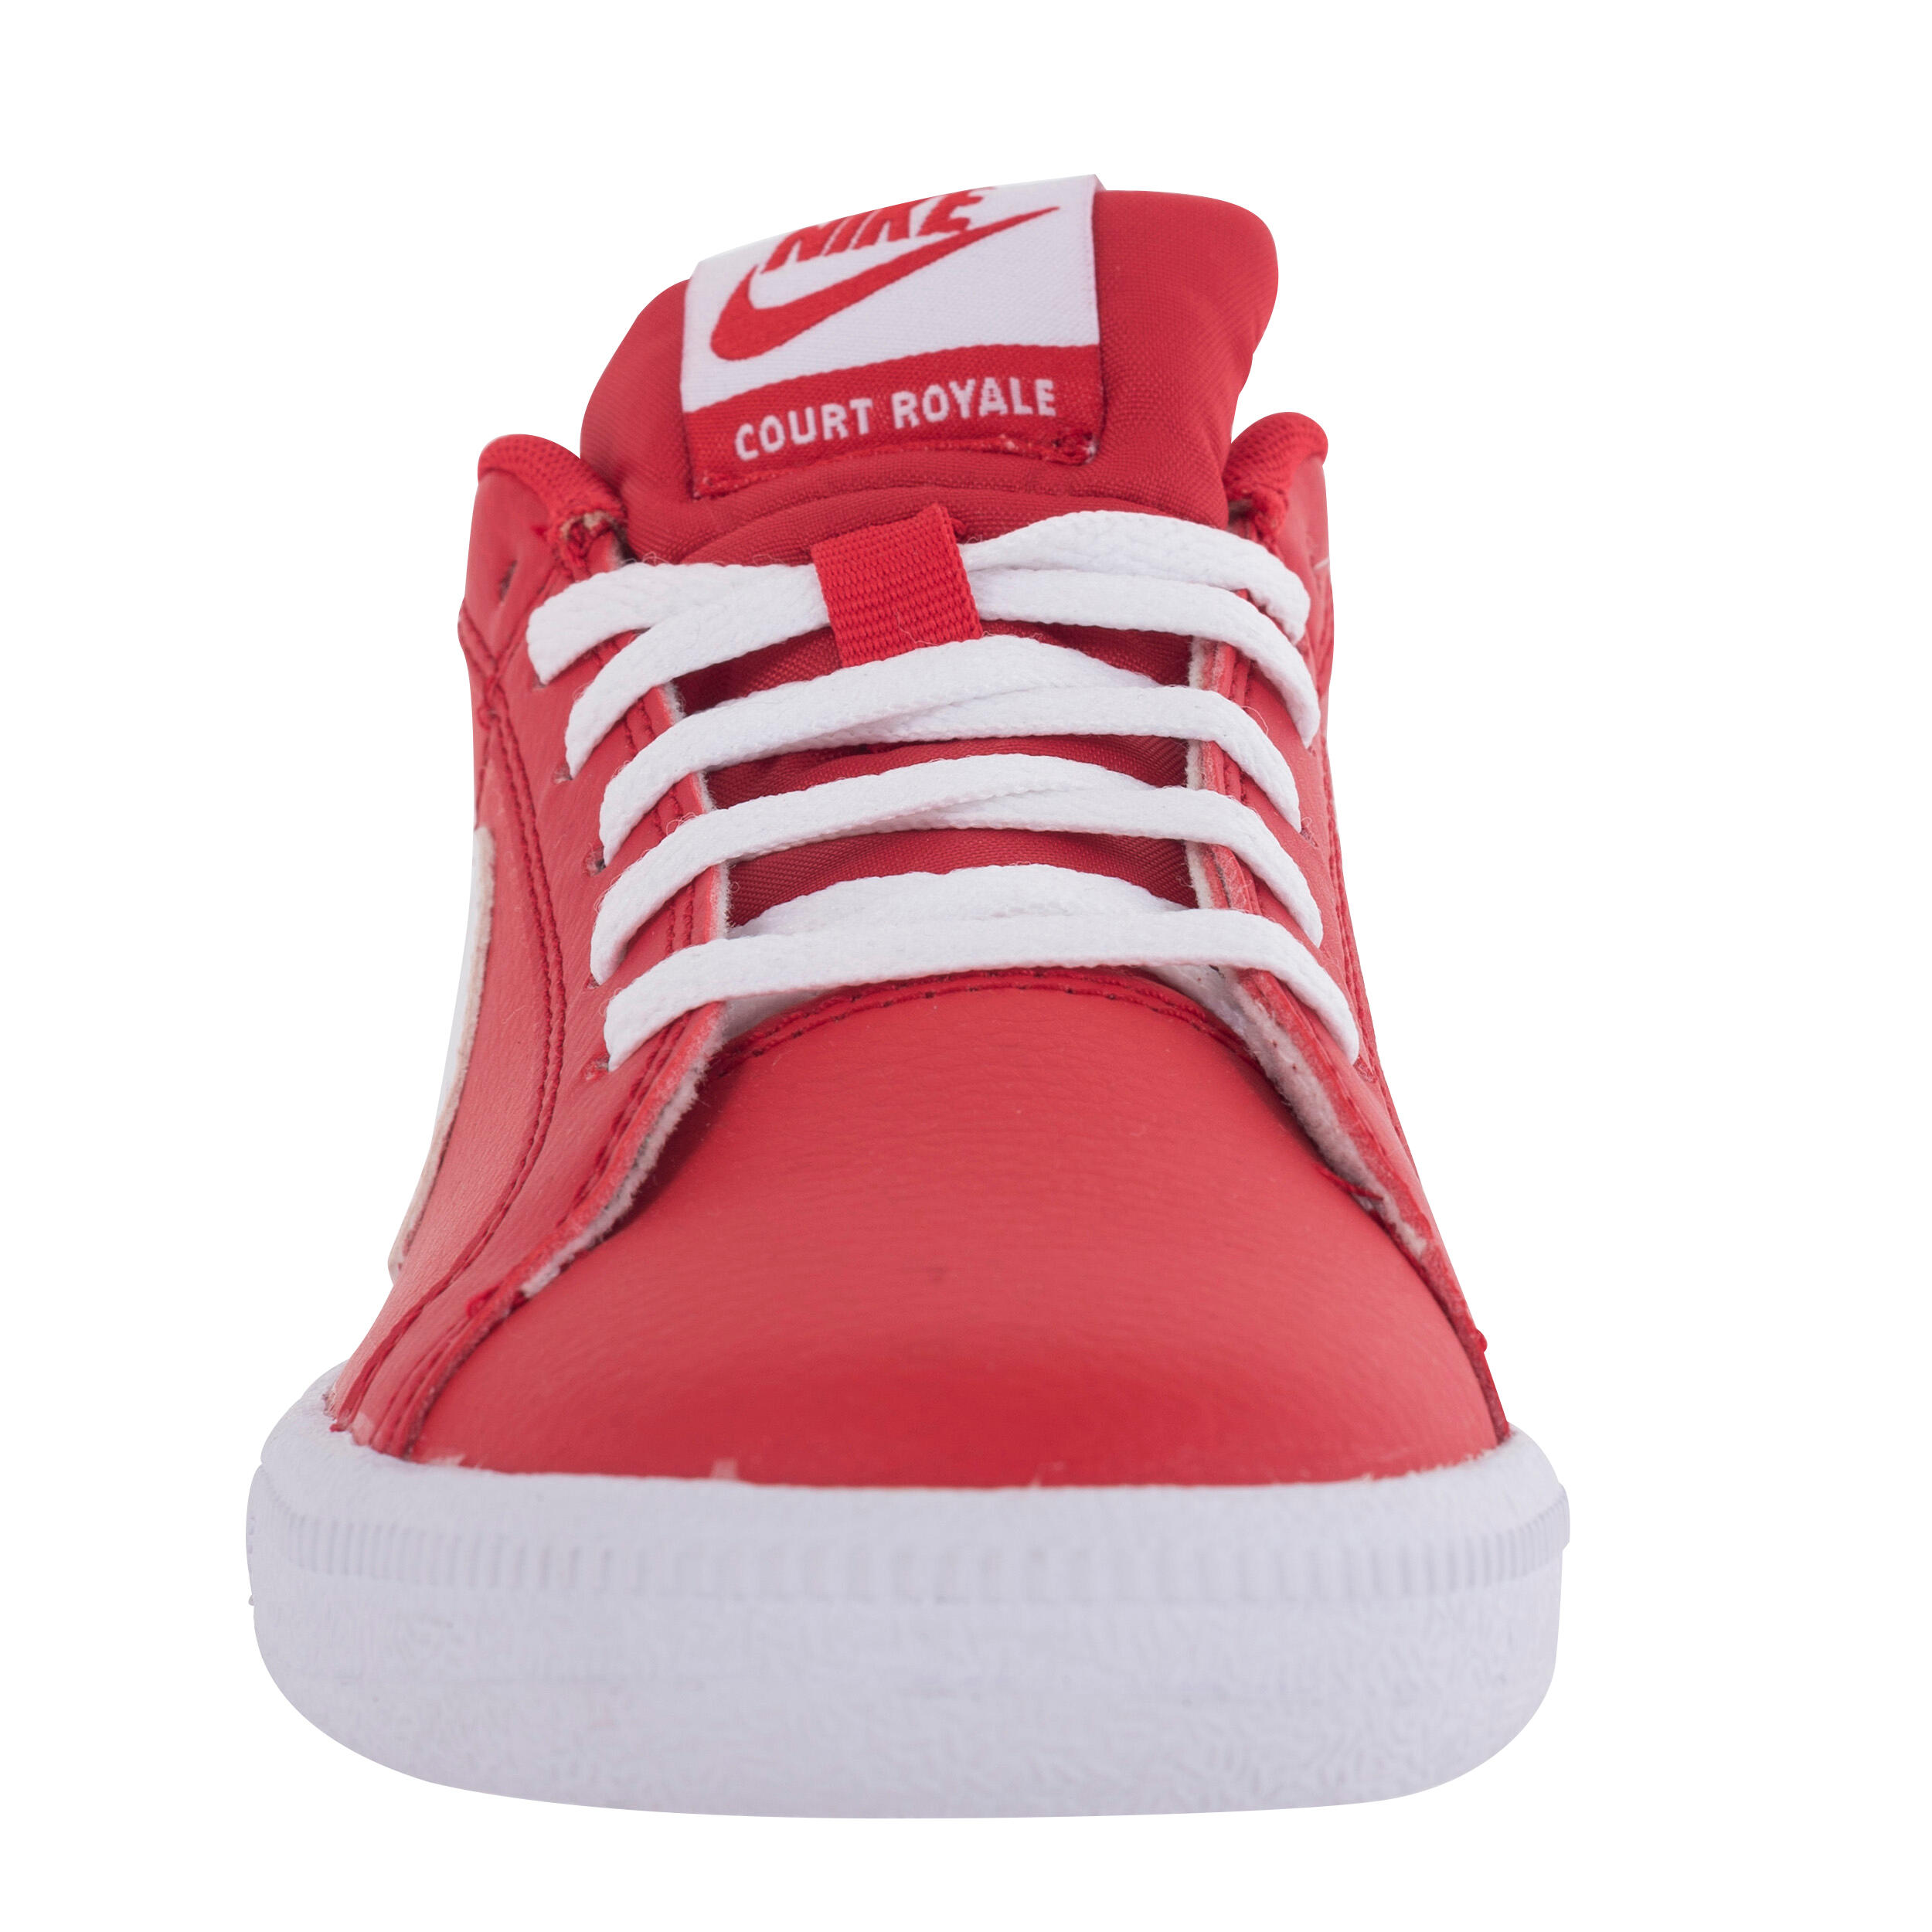 Court Royale Junior Tennis Shoes - Red 4/9